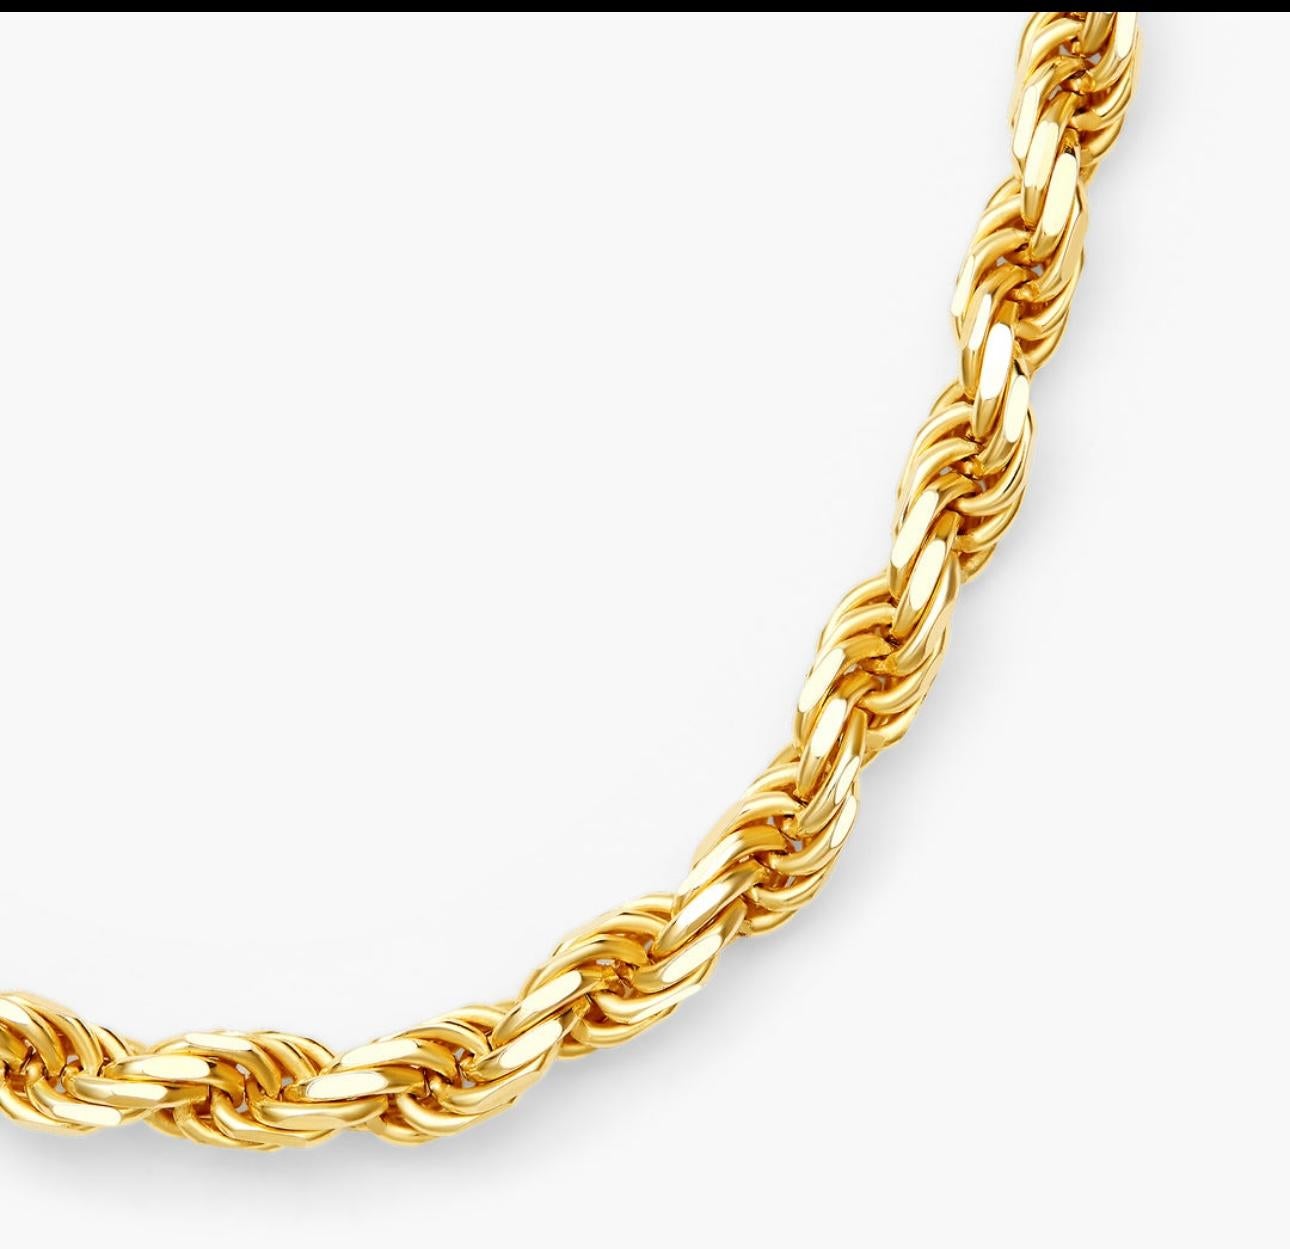 Vintage 14 Karat Yellow Gold 20.5 Gm, Rope Chain Necklace For Sale 5